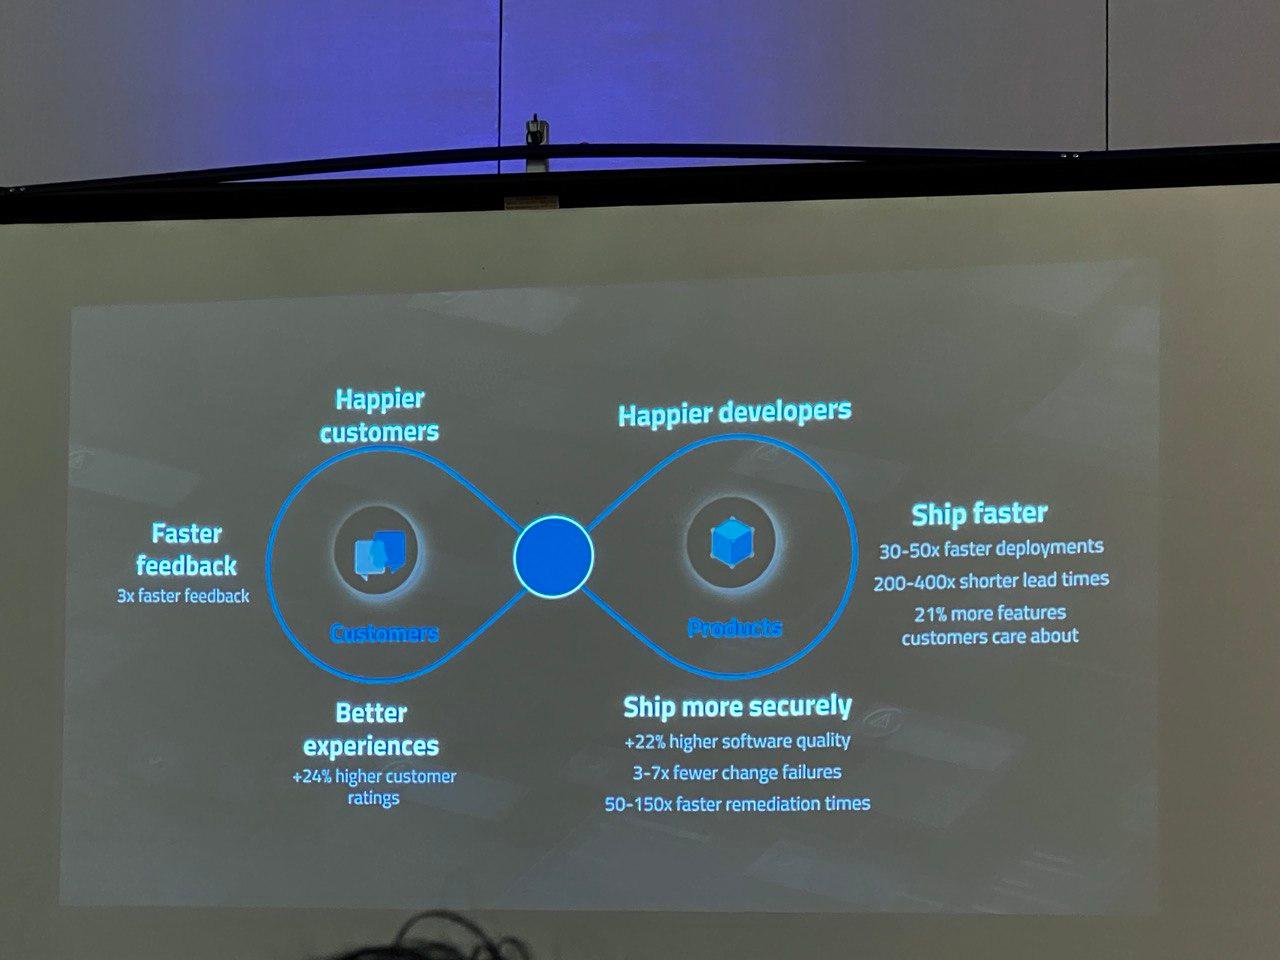 A photo of a presentation with an infinity loop mentioning happier customers, happier developers, ship faster, ship more securely, better experiences, faster feedback.